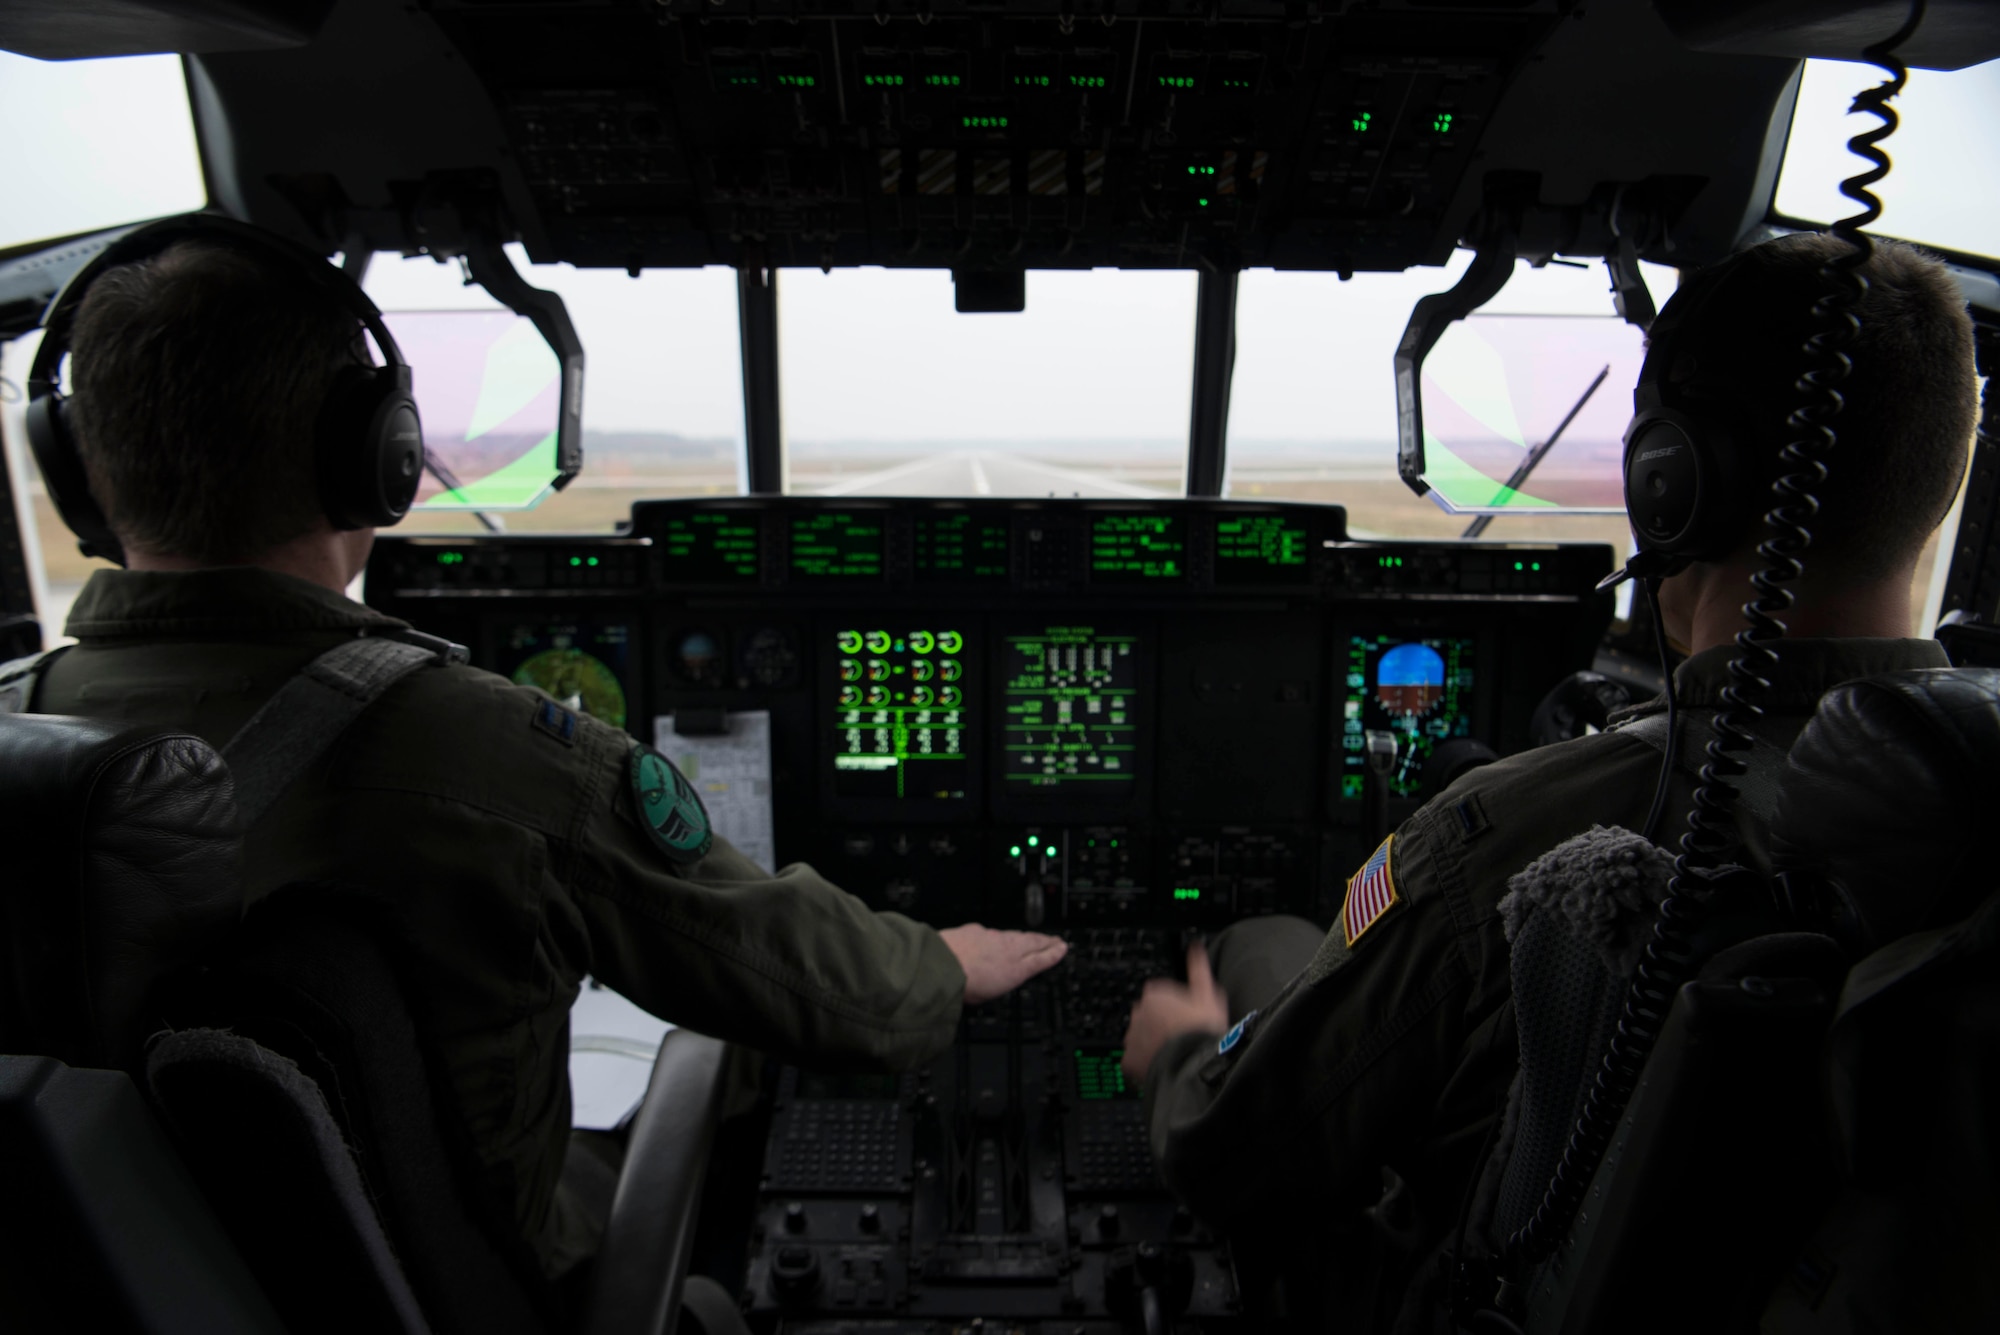 U.S. Air Force Capt. Jared Johnson (left) and U.S. Air Force 1st Lt. Kyle Holzem, both C-130J Super Hercules pilots assigned to the 37th Airlift Squadron, take off for Operation Toy Drop 2017, in a U.S. Air Force C-130J on Ramstein Air Base, Germany, Dec. 6, 2017. The aircraft flew over Alzey Drop Zone, Germany, where paratroopers from the U.S. Army, U.S. Air Force, German, Italian, Dutch, British, and Estonian militaries performed static-line jumps out of the aircraft. (U.S. Air Force photo by Senior Airman Devin M. Rumbaugh)